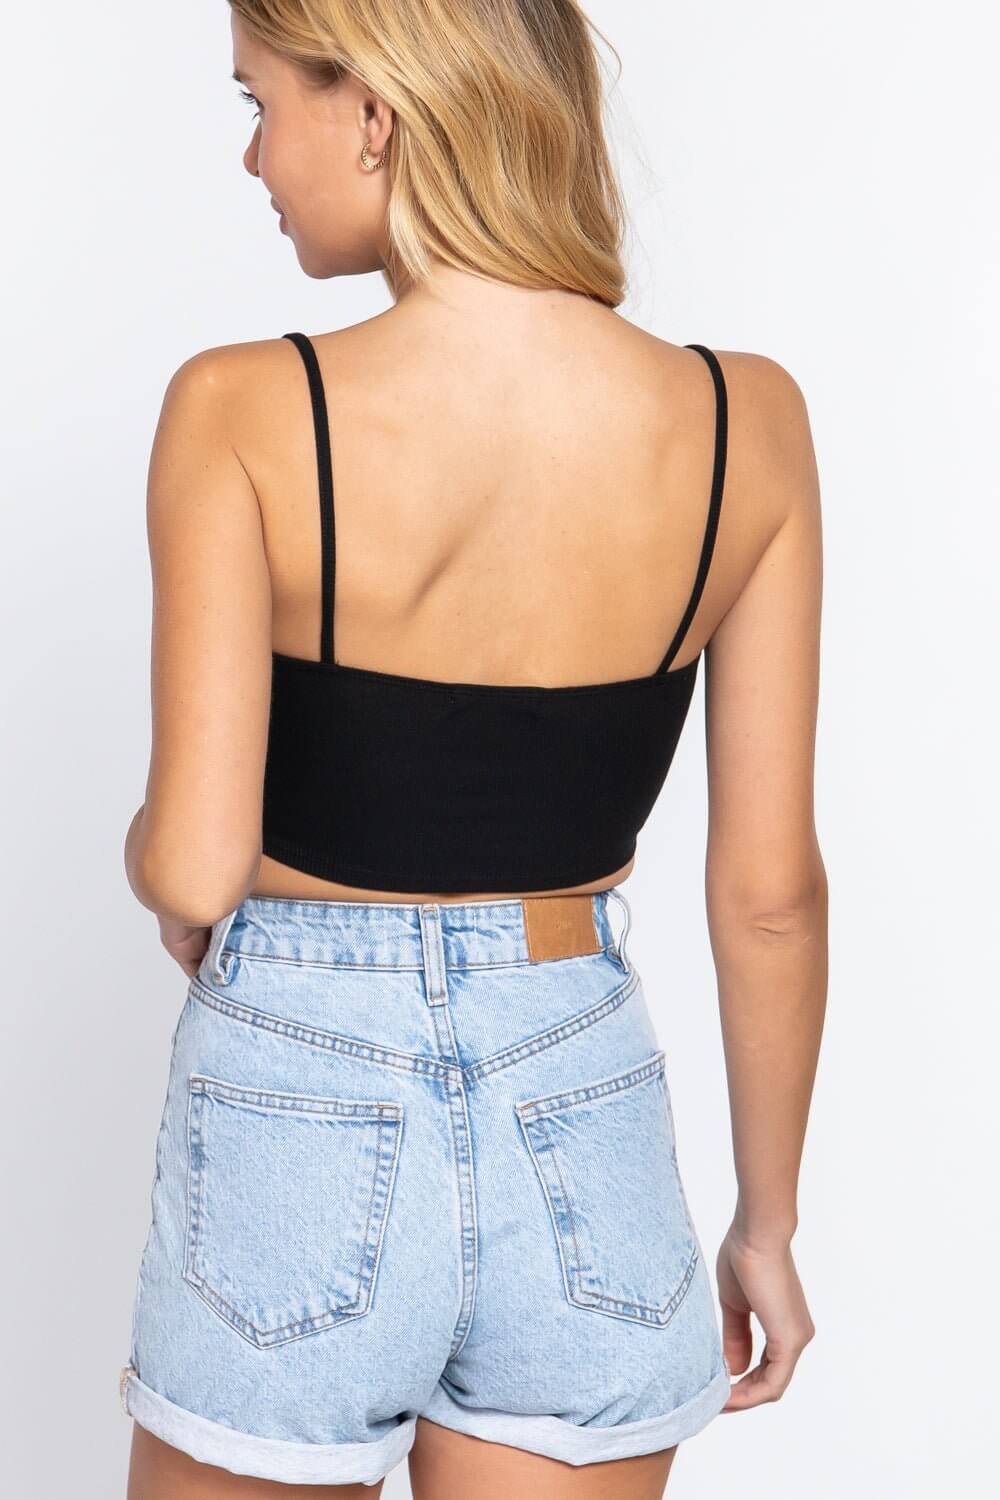 Black Spaghetti Strap Criss Cross Crop Top - Shopping Therapy Tops